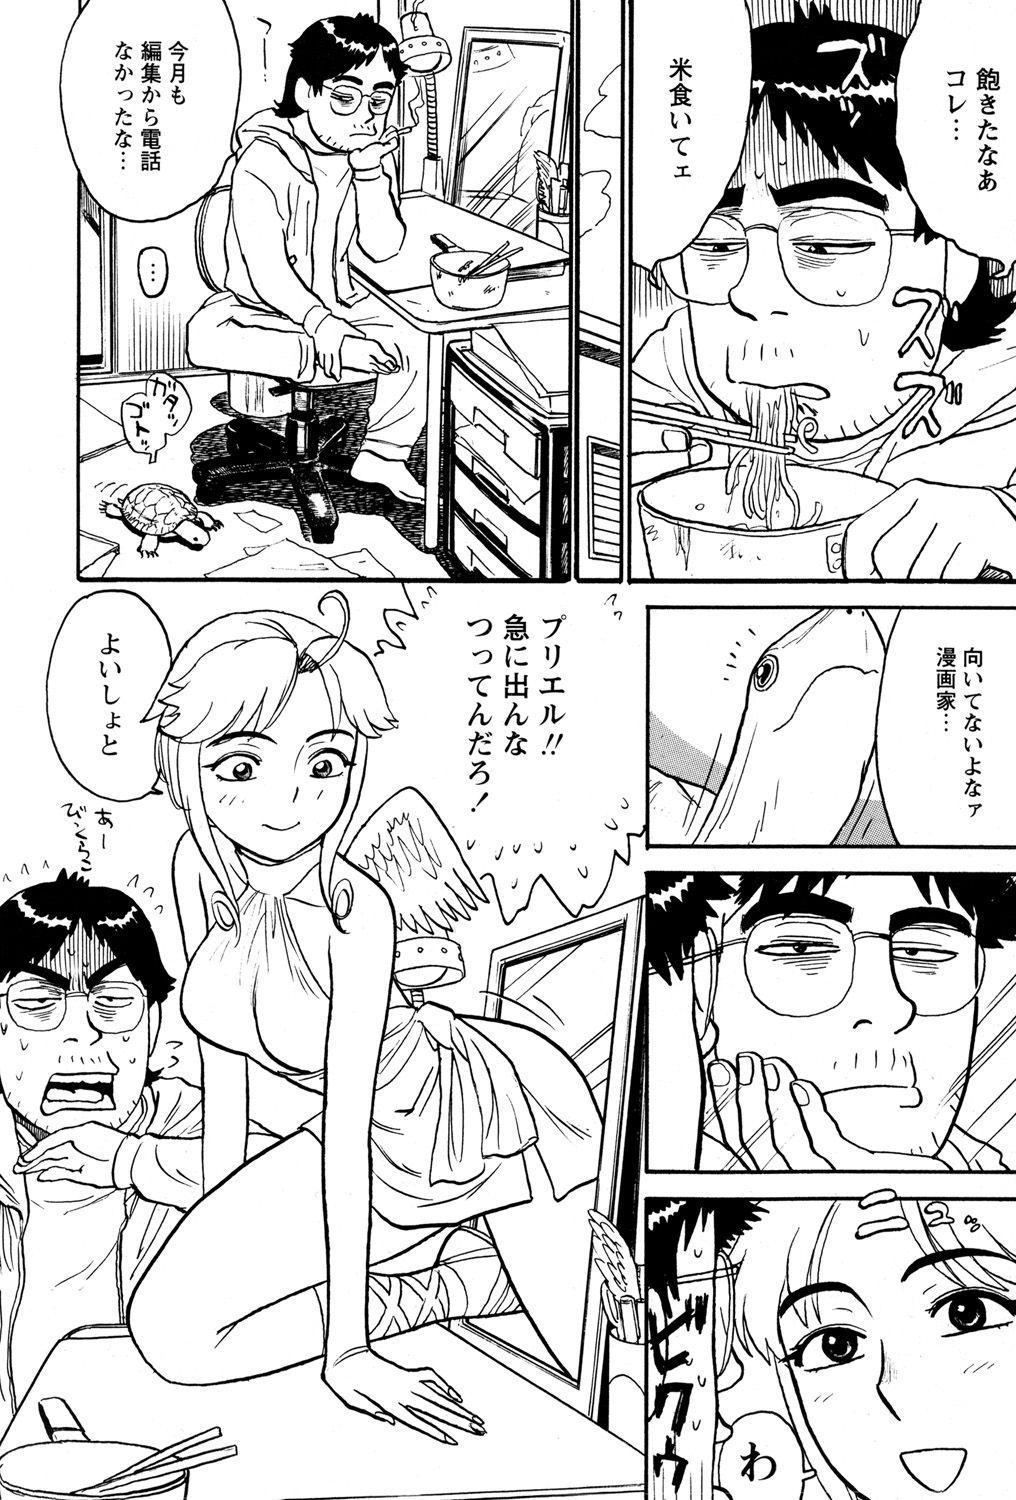 Shorts ああ神様仏様 その3 Real Amature Porn - Page 2